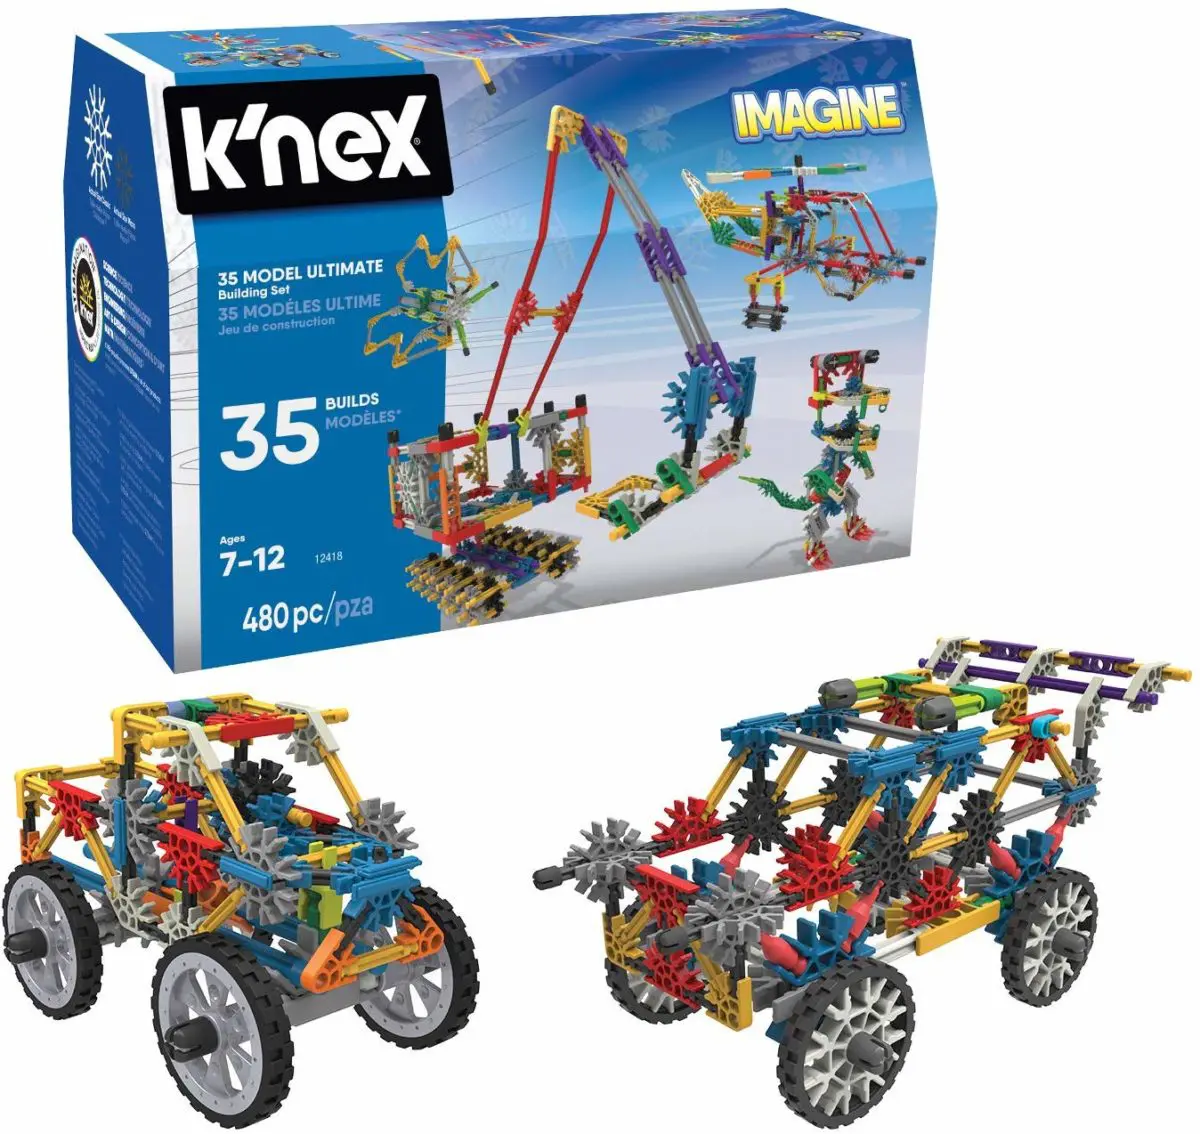 K’NEX 35 Model Building Set - Top Toys and Gifts for Seven Year Old Boys 1